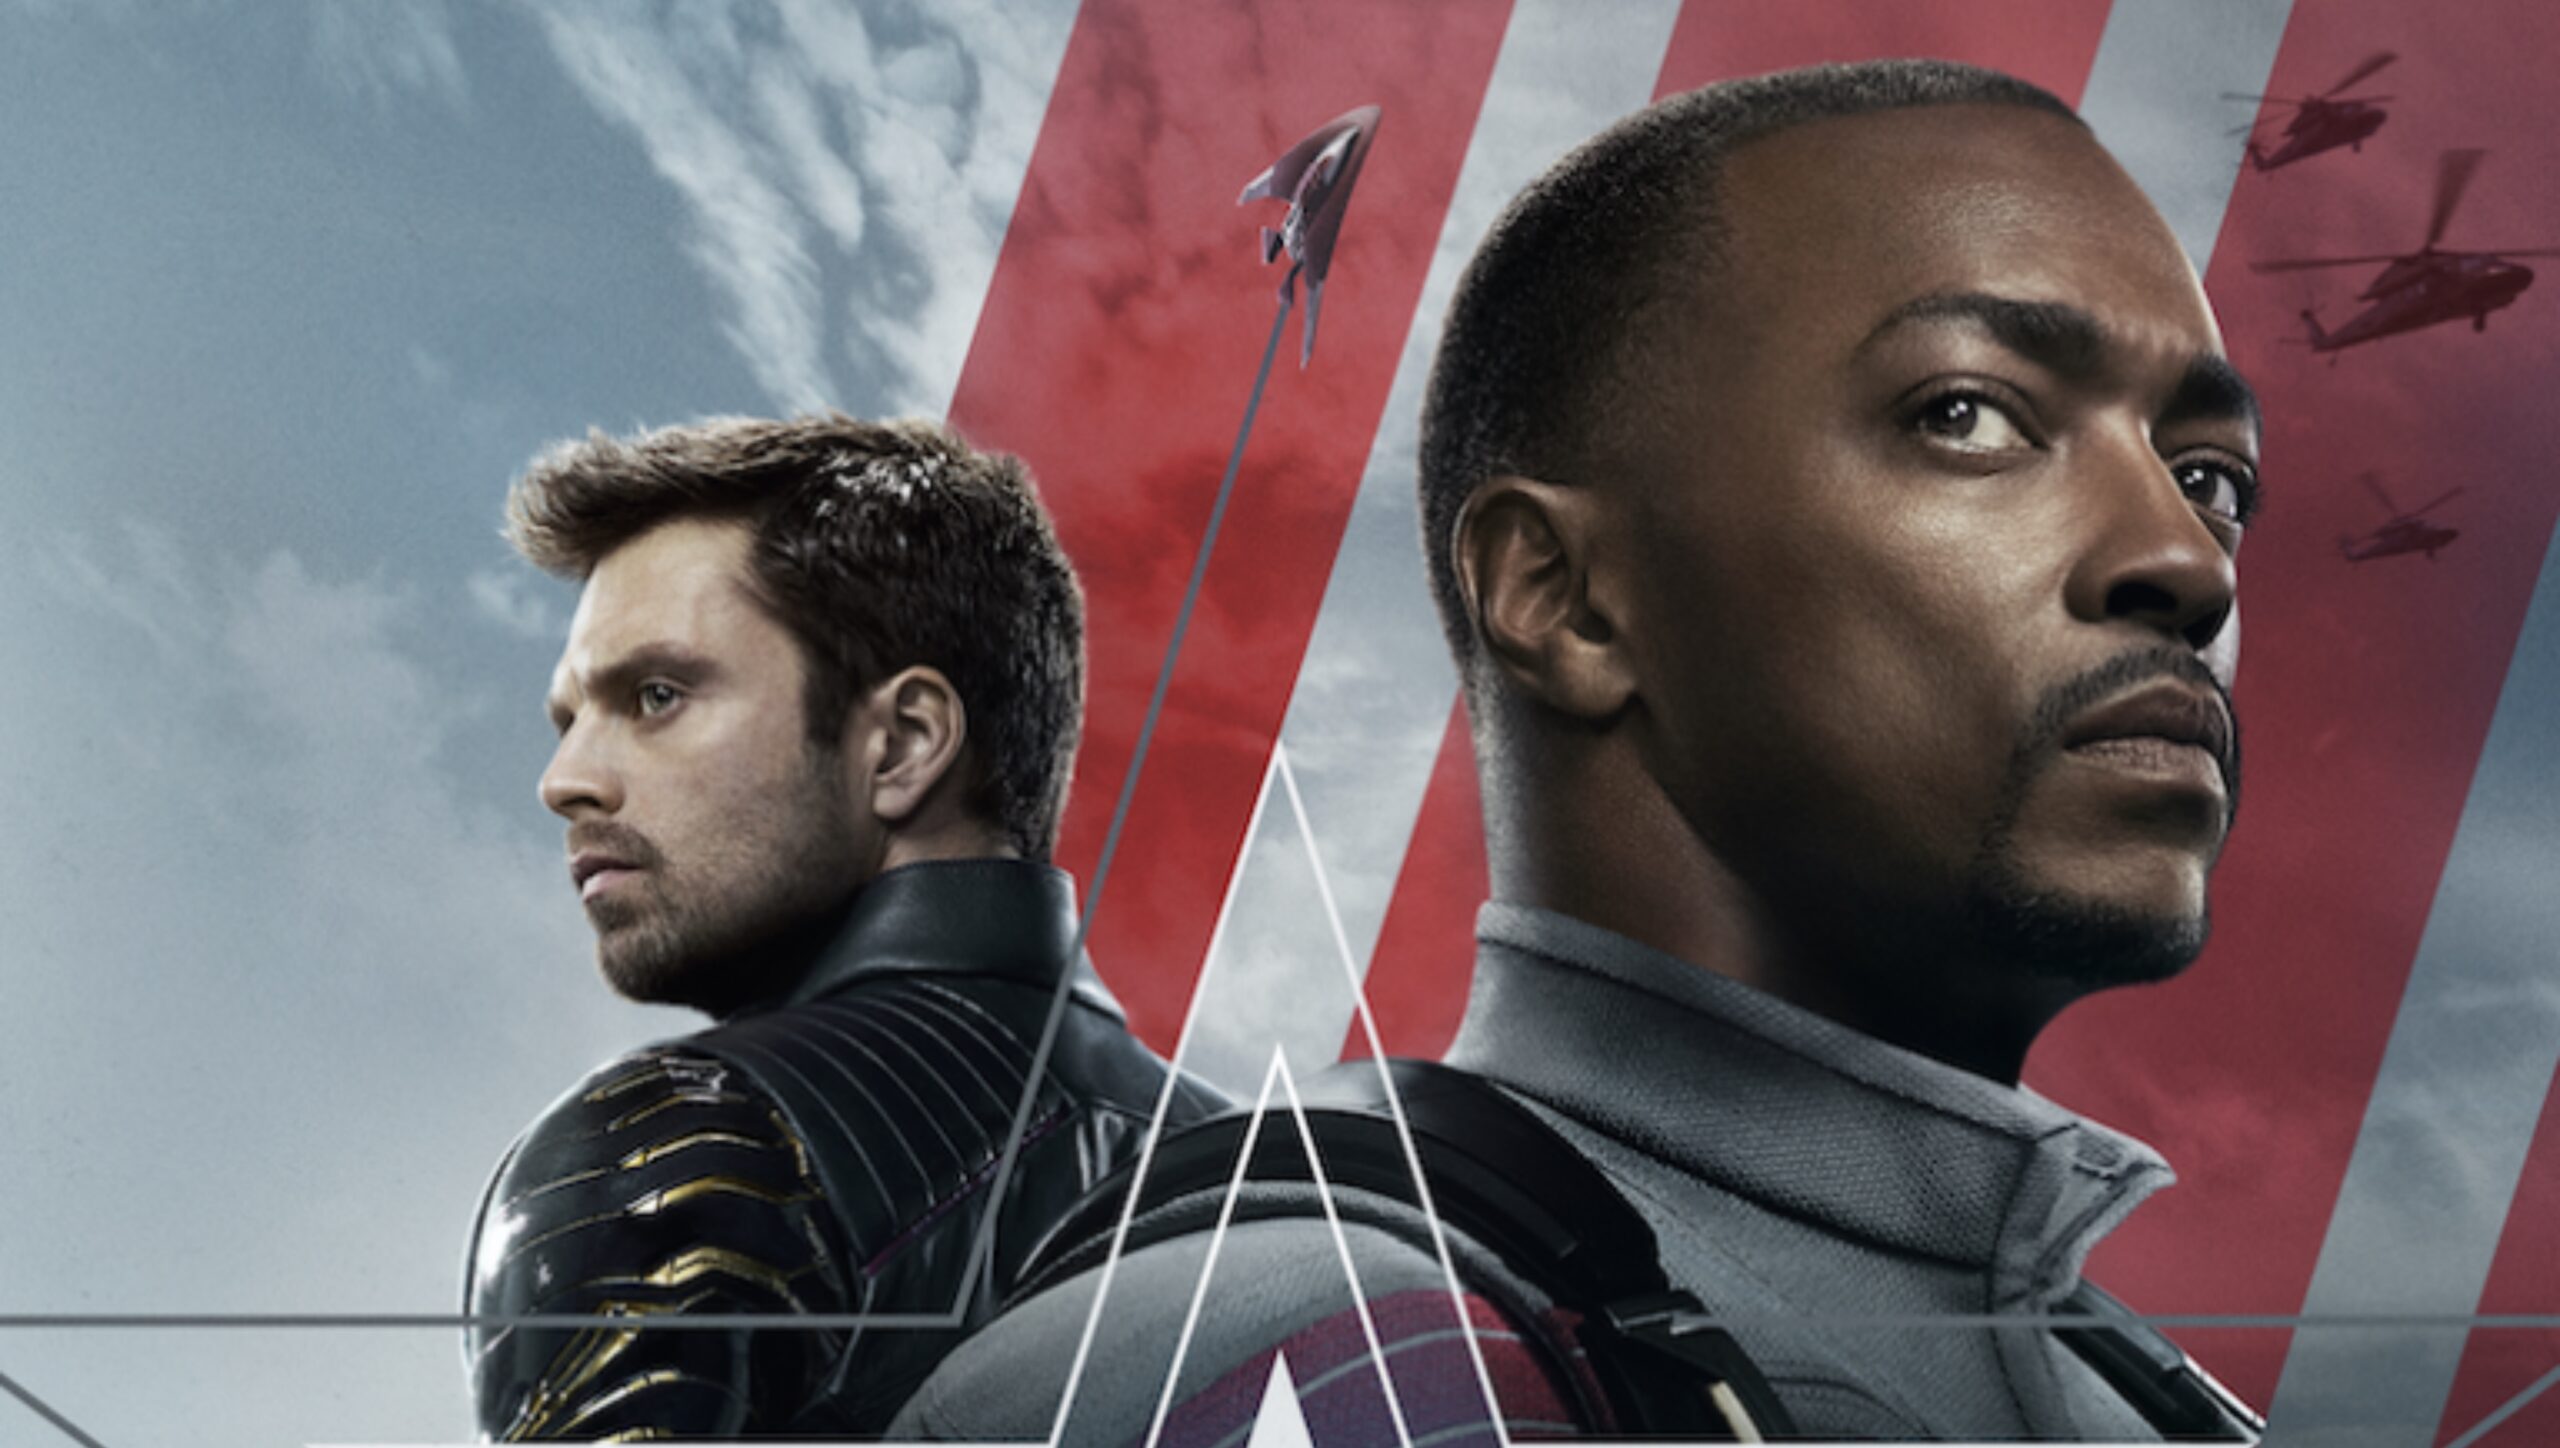 'The Falcon and the Winter Soldier' Disney+ Series Receives 16+ Rating